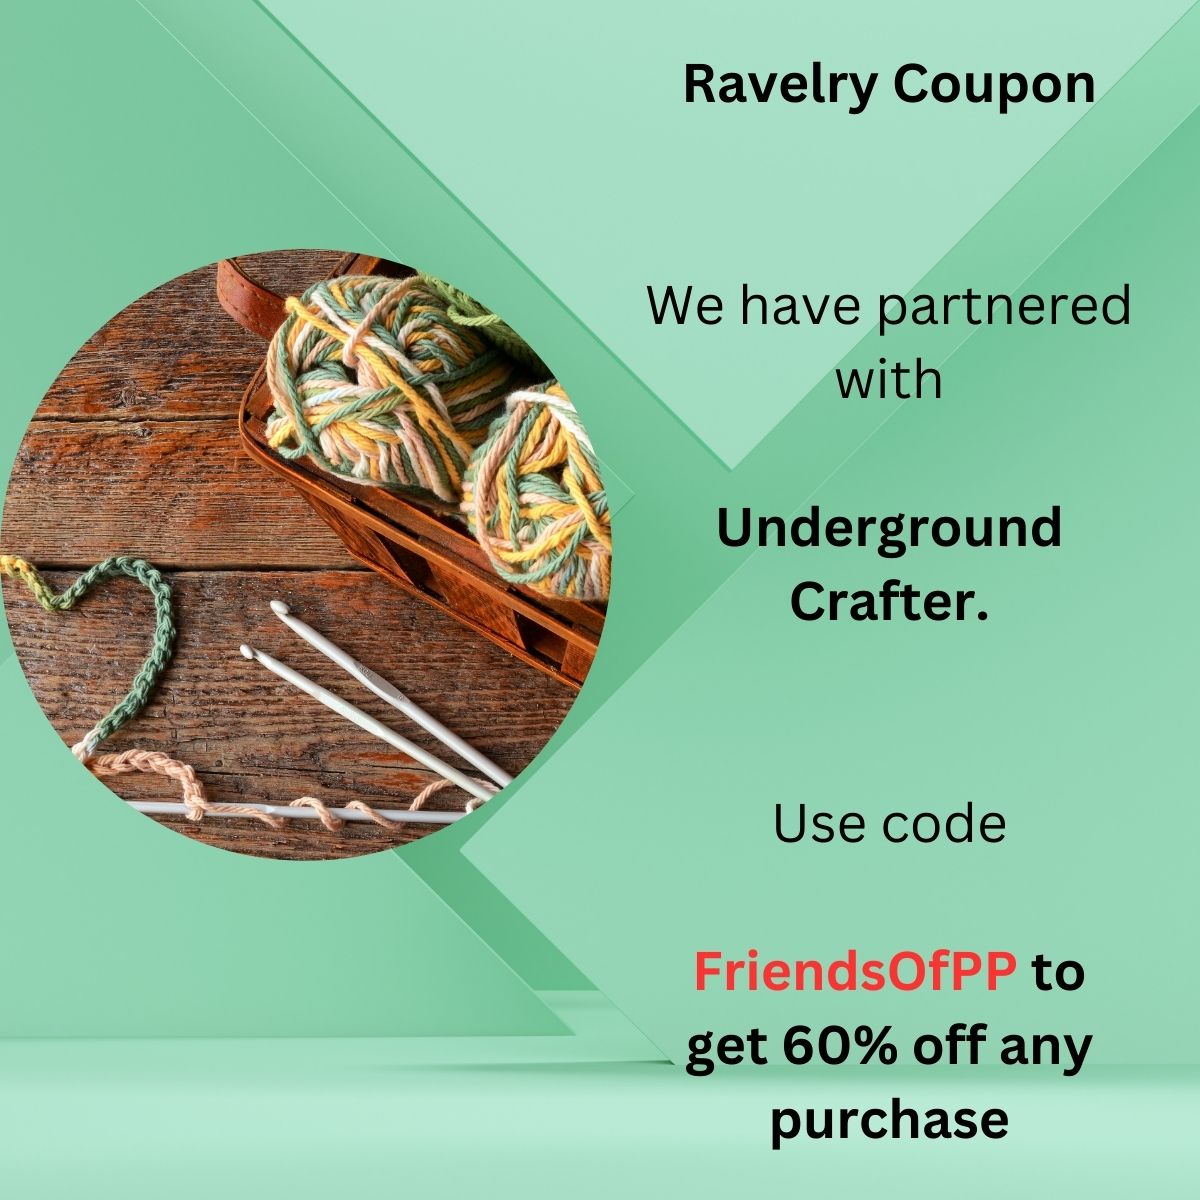 Ravelry Coupon We have partnered with Underground Crafter. Use code FriendsOfPP to get 60% off any purchase